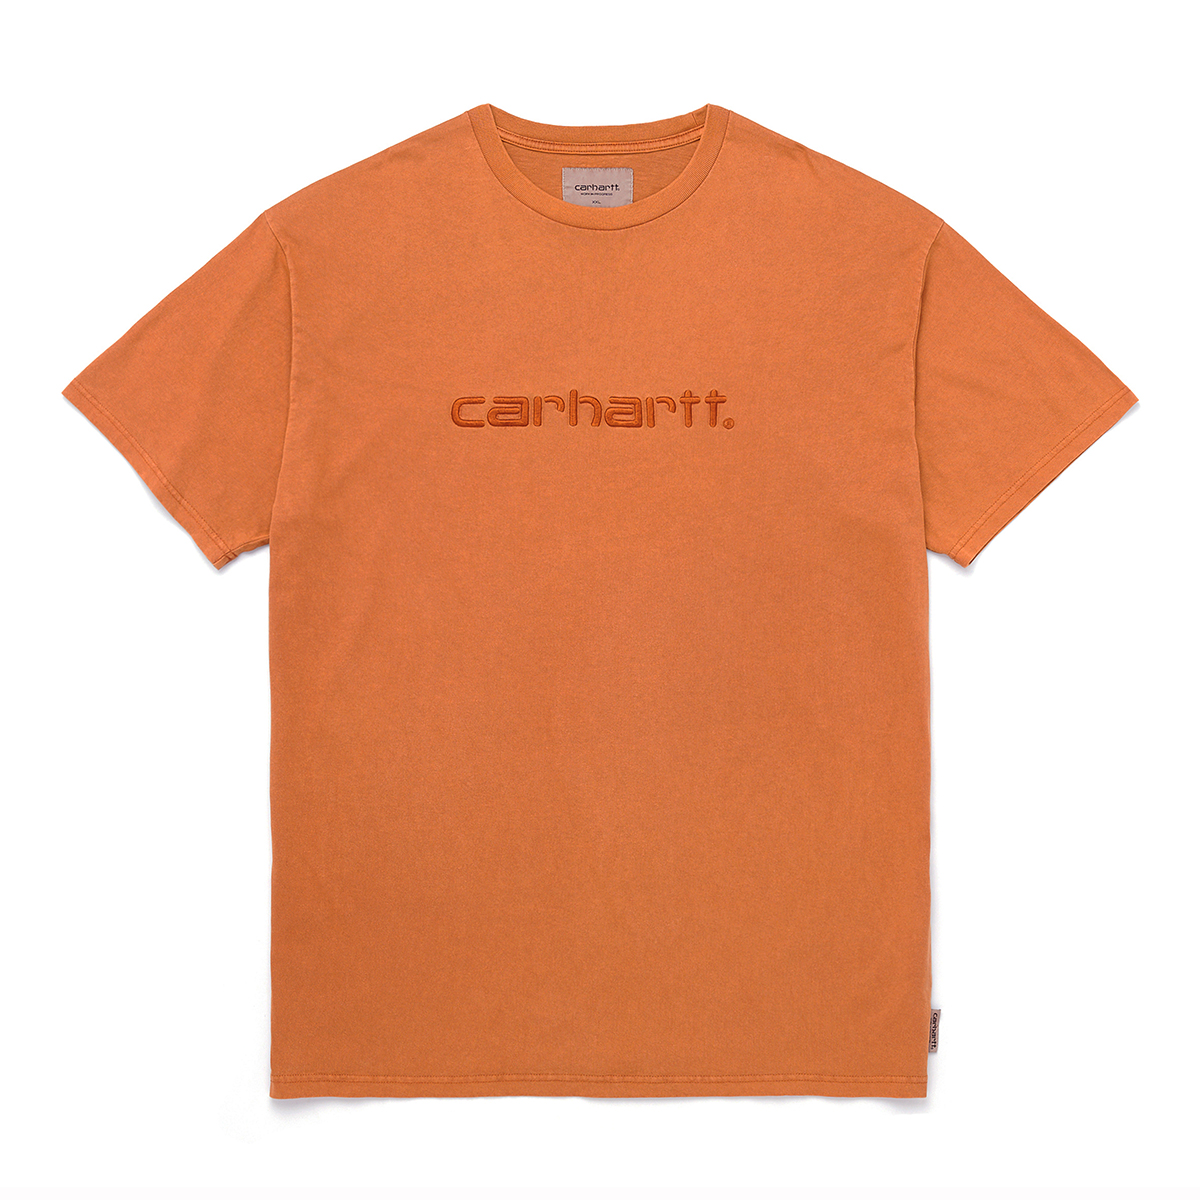 S/S Carhartt Embroidery T-shirt (PD)